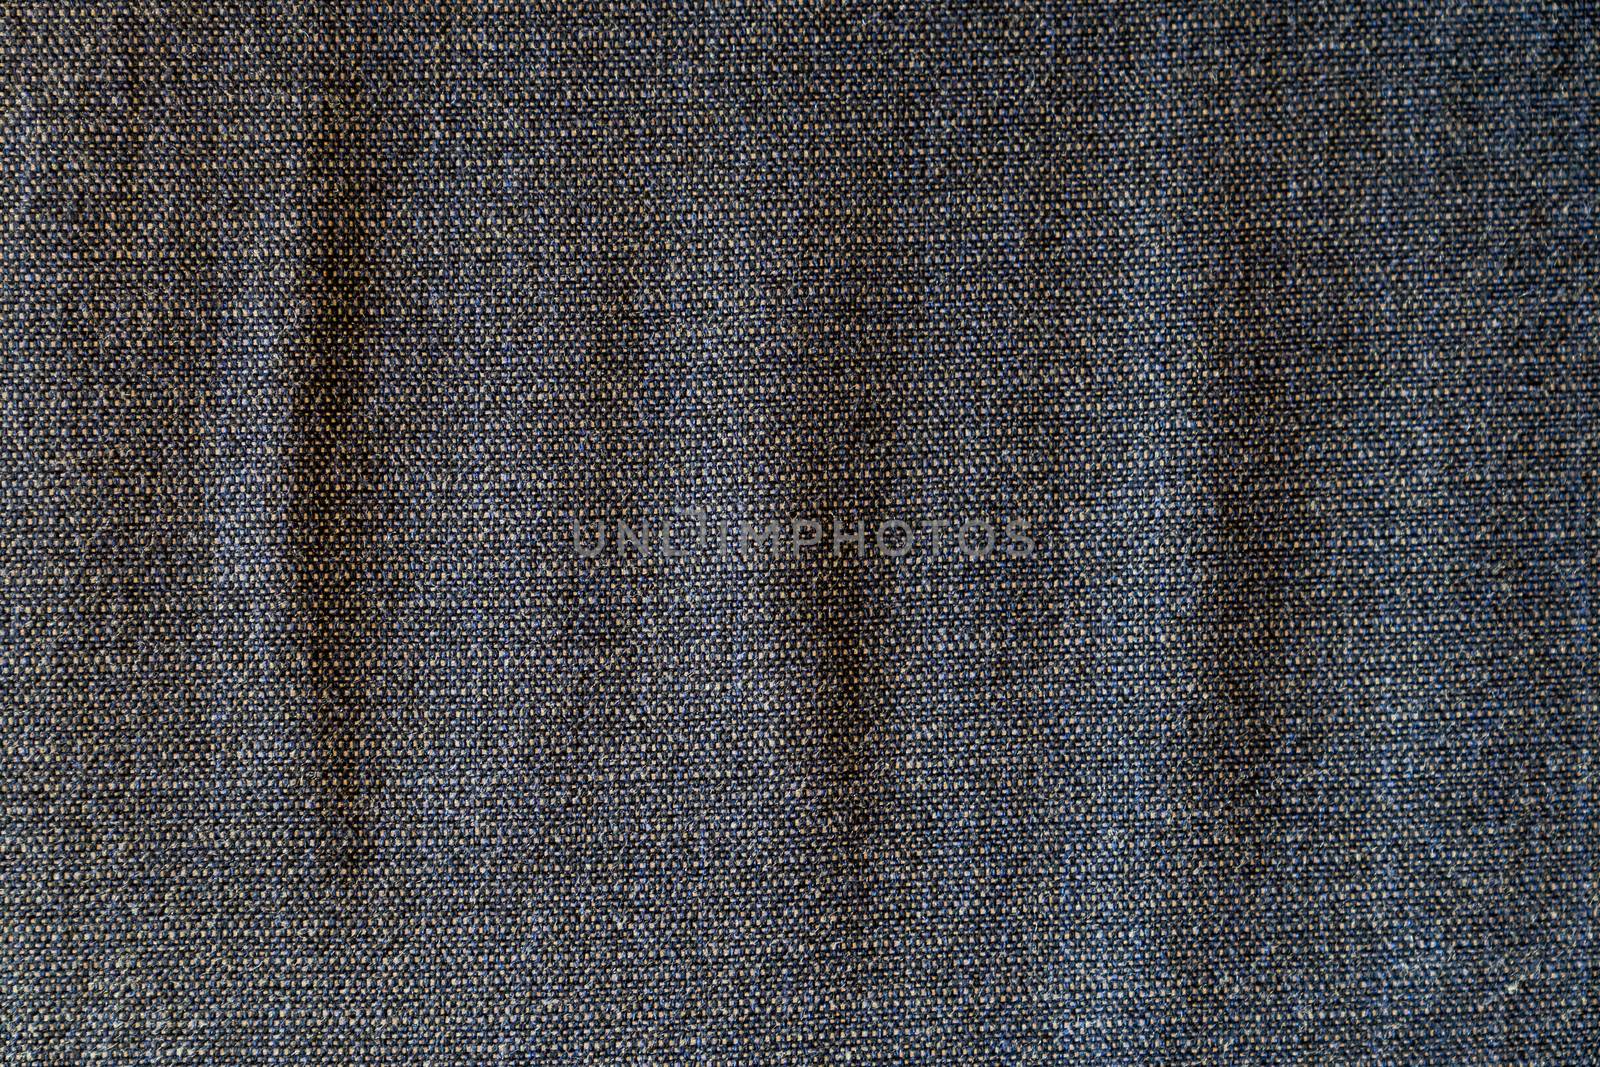 brown fabric texture for background.